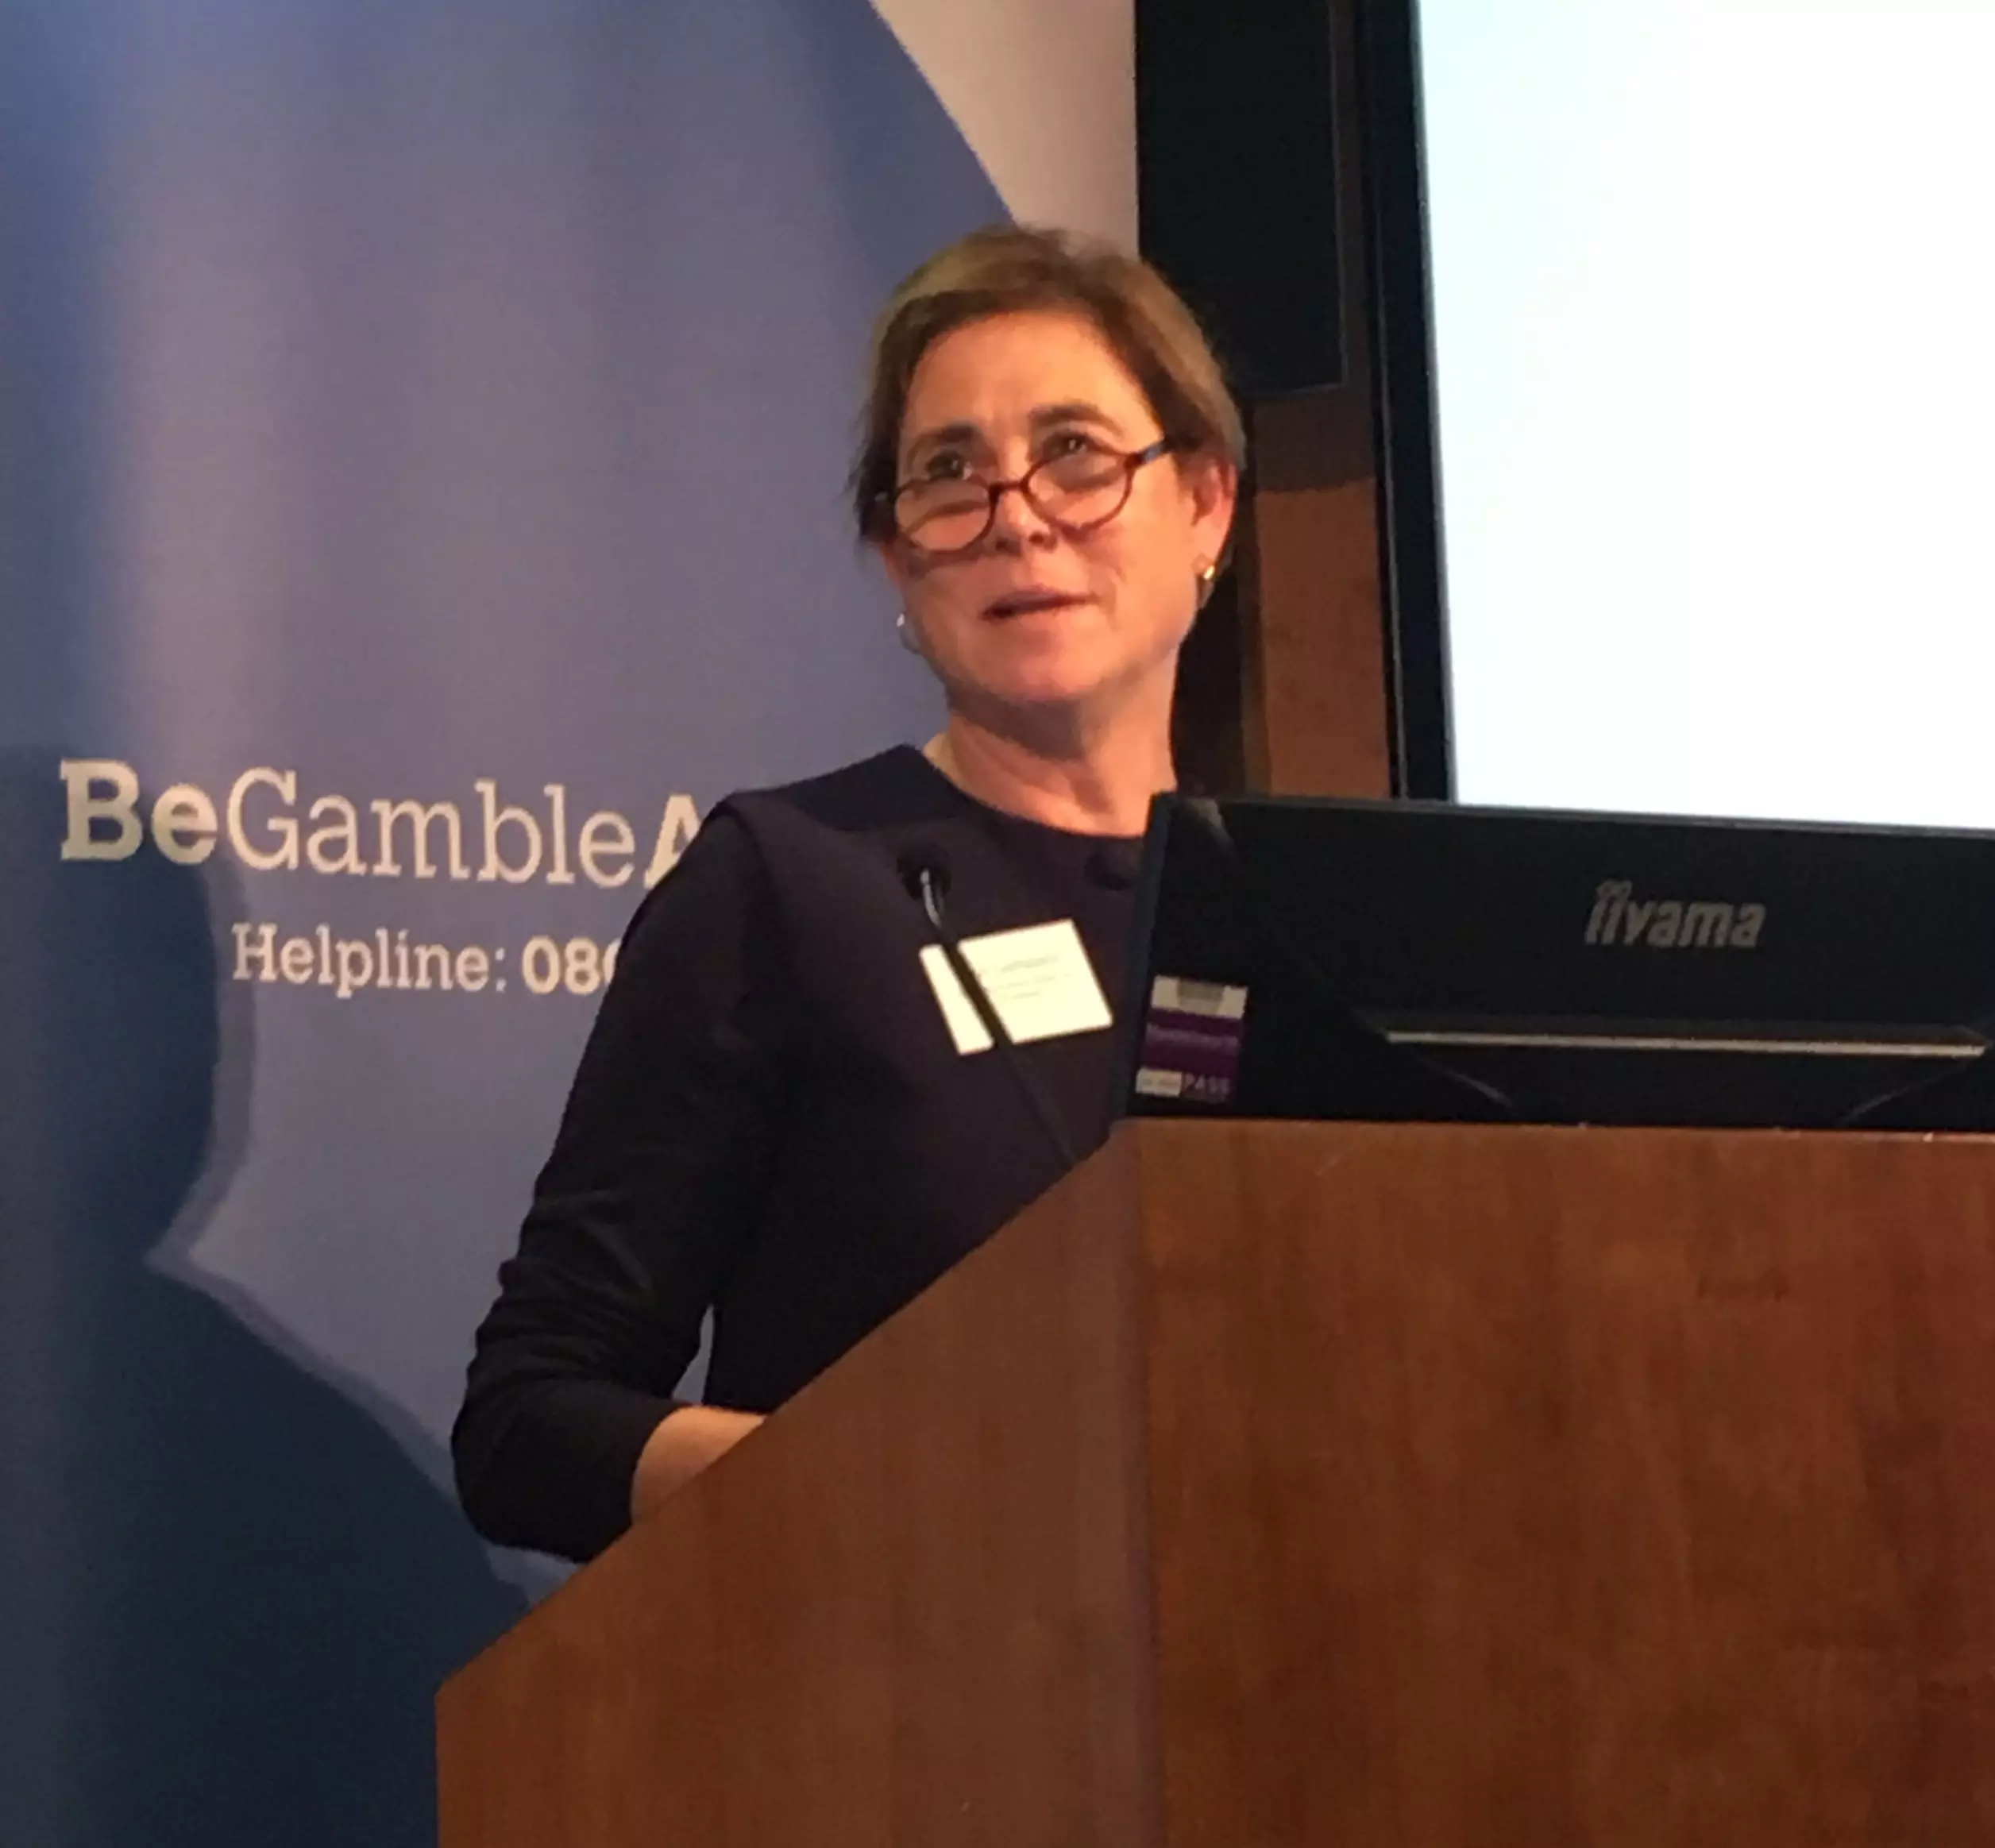 Kate Lampard CBE opening GambleAware's 6th annual 'reducing gambling-related harms' conference